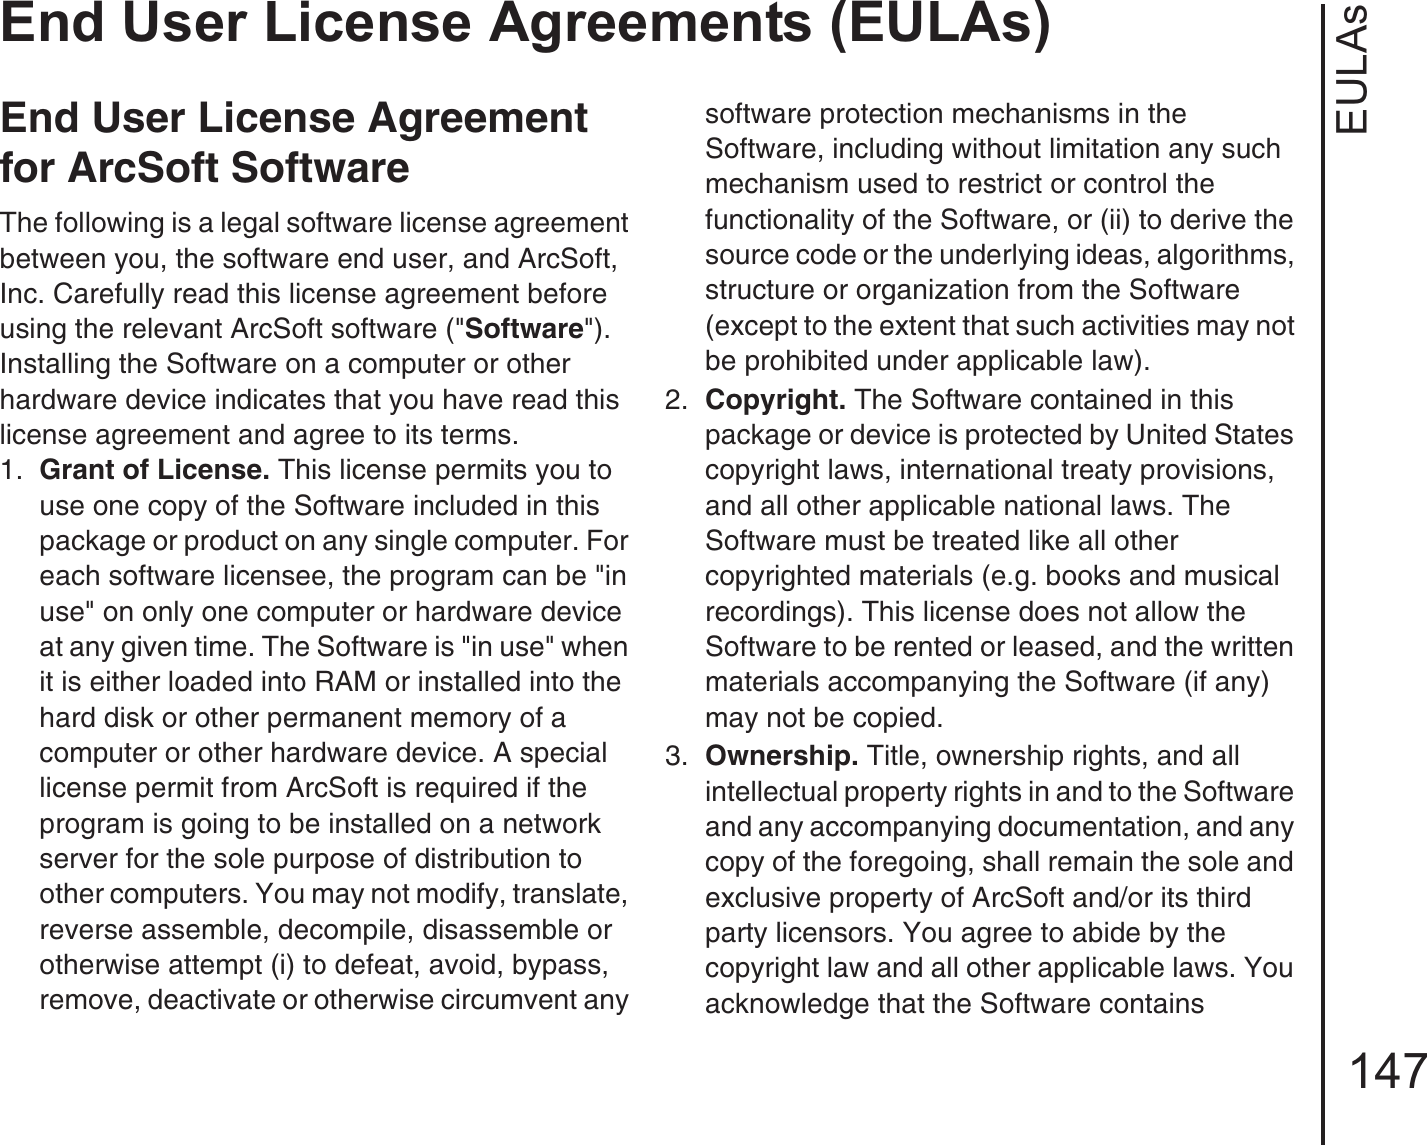 EULAsEnd User License Agreements (EULAs)147End User License Agreement for ArcSoft SoftwareThe following is a legal software license agreement between you, the software end user, and ArcSoft, Inc. Carefully read this license agreement before using the relevant ArcSoft software (&quot;Software&quot;). Installing the Software on a computer or other hardware device indicates that you have read this license agreement and agree to its terms.1.  Grant of License. This license permits you to use one copy of the Software included in this package or product on any single computer. For each software licensee, the program can be &quot;in use&quot; on only one computer or hardware device at any given time. The Software is &quot;in use&quot; when it is either loaded into RAM or installed into the hard disk or other permanent memory of a computer or other hardware device. A special license permit from ArcSoft is required if the program is going to be installed on a network server for the sole purpose of distribution to other computers. You may not modify, translate, reverse assemble, decompile, disassemble or otherwise attempt (i) to defeat, avoid, bypass, remove, deactivate or otherwise circumvent any software protection mechanisms in the Software, including without limitation any such mechanism used to restrict or control the functionality of the Software, or (ii) to derive the source code or the underlying ideas, algorithms, structure or organization from the Software (except to the extent that such activities may not be prohibited under applicable law).2.  Copyright. The Software contained in this package or device is protected by United States copyright laws, international treaty provisions, and all other applicable national laws. The Software must be treated like all other copyrighted materials (e.g. books and musical recordings). This license does not allow the Software to be rented or leased, and the written materials accompanying the Software (if any) may not be copied.3.  Ownership. Title, ownership rights, and all intellectual property rights in and to the Software and any accompanying documentation, and any copy of the foregoing, shall remain the sole and exclusive property of ArcSoft and/or its third party licensors. You agree to abide by the copyright law and all other applicable laws. You acknowledge that the Software contains 